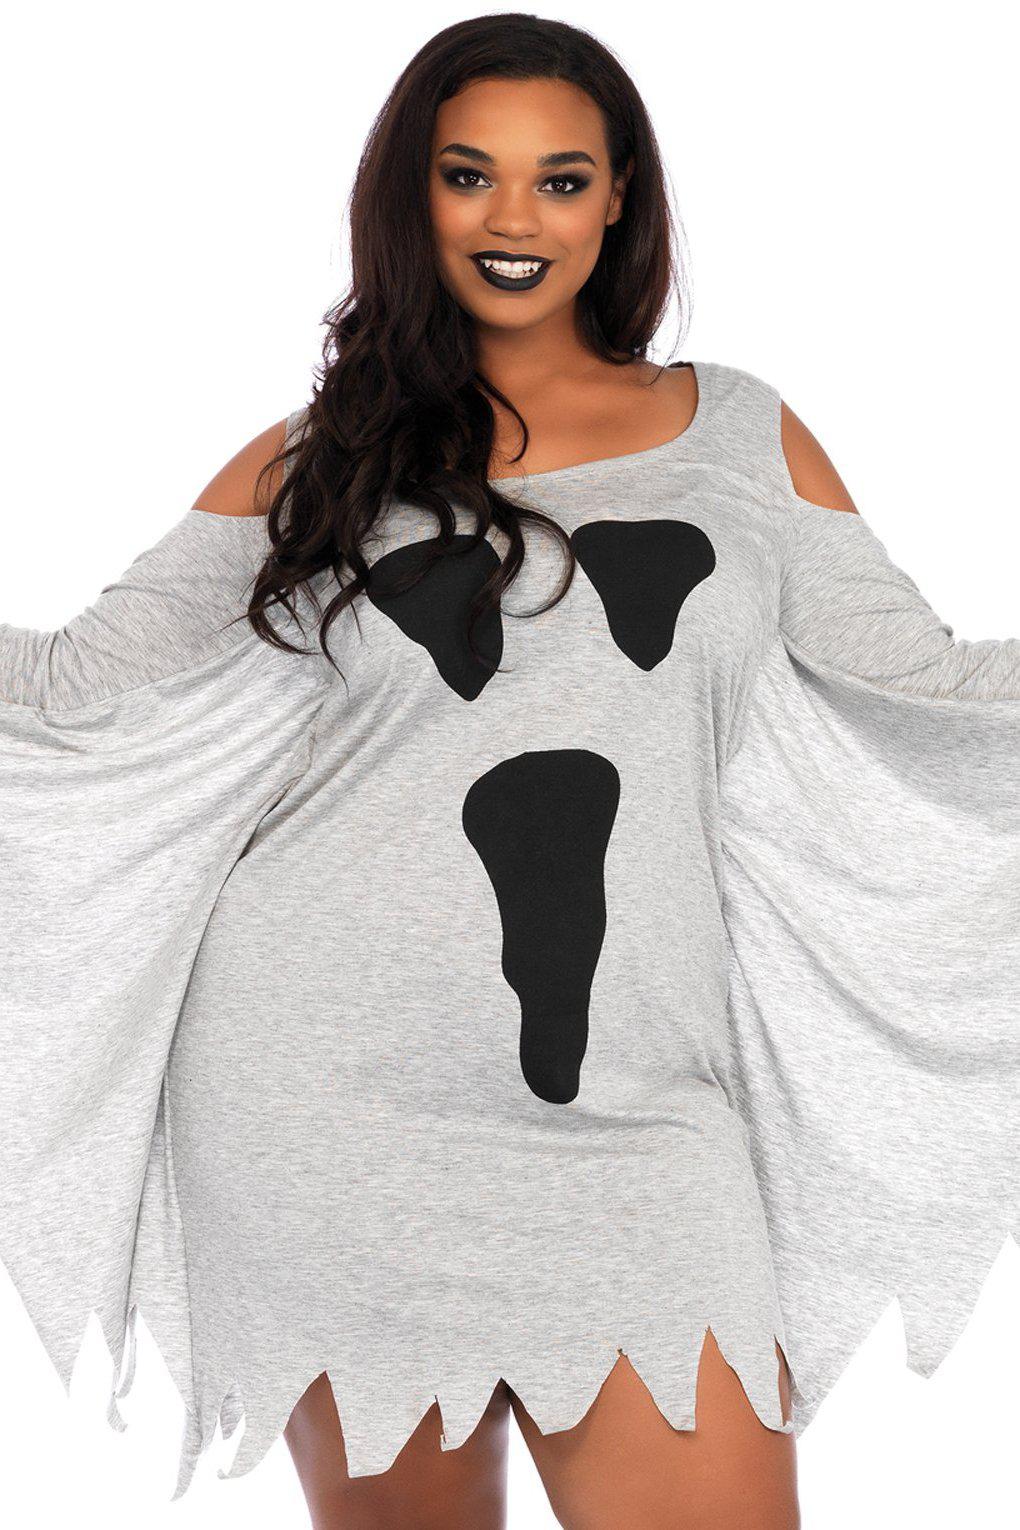 Plus Size Jersey Ghost Dress-Other Costumes-Leg Avenue-Grey-1/2XL-SEXYSHOES.COM